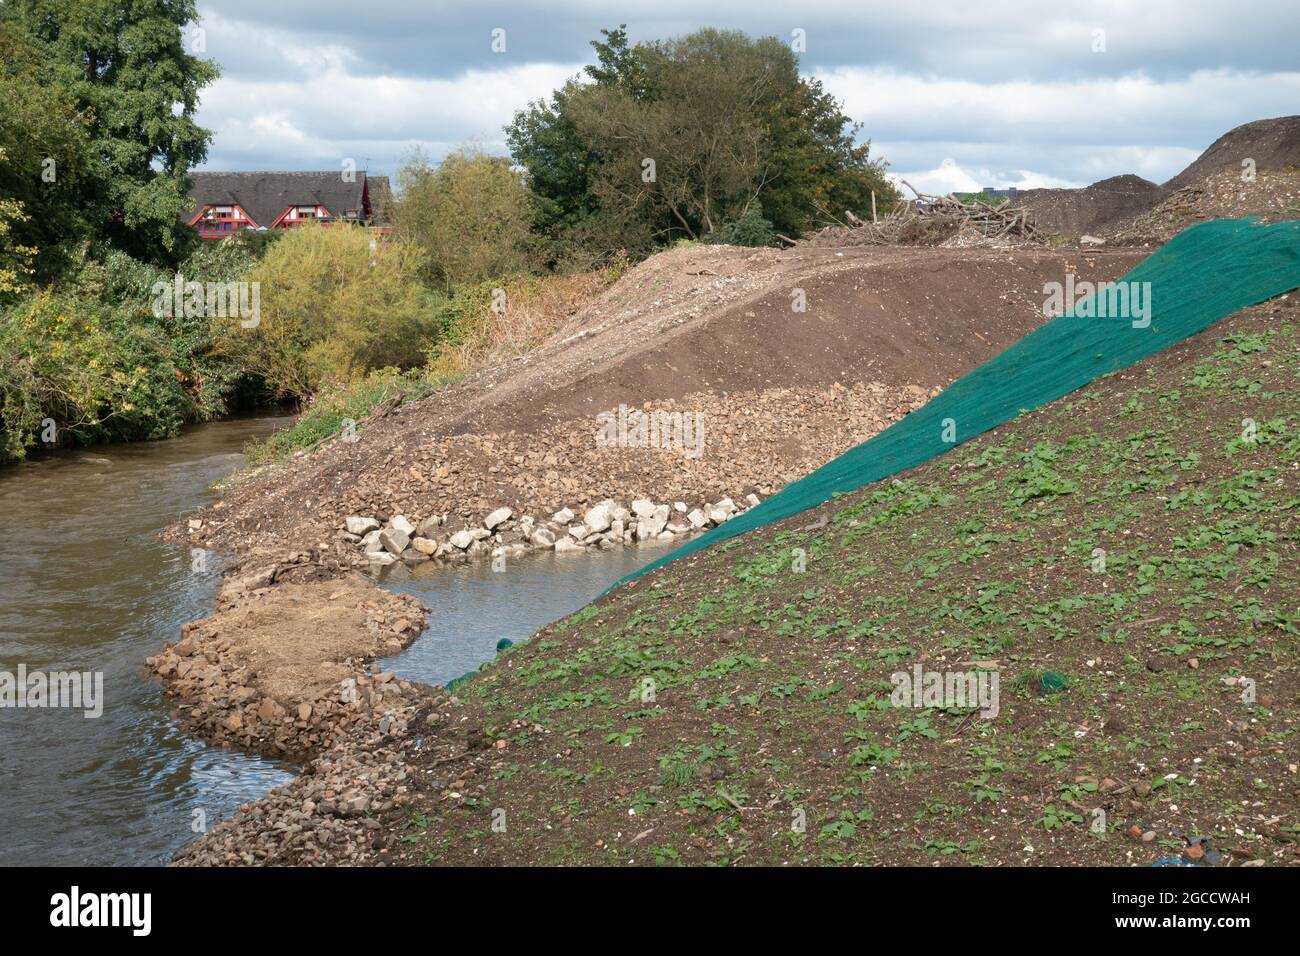 River Trent re-routing in a new naturalised channel between Stoke town centre and Boothen, Stoke-on-Trent, Staffordshire, UK, 2020 Stock Photo